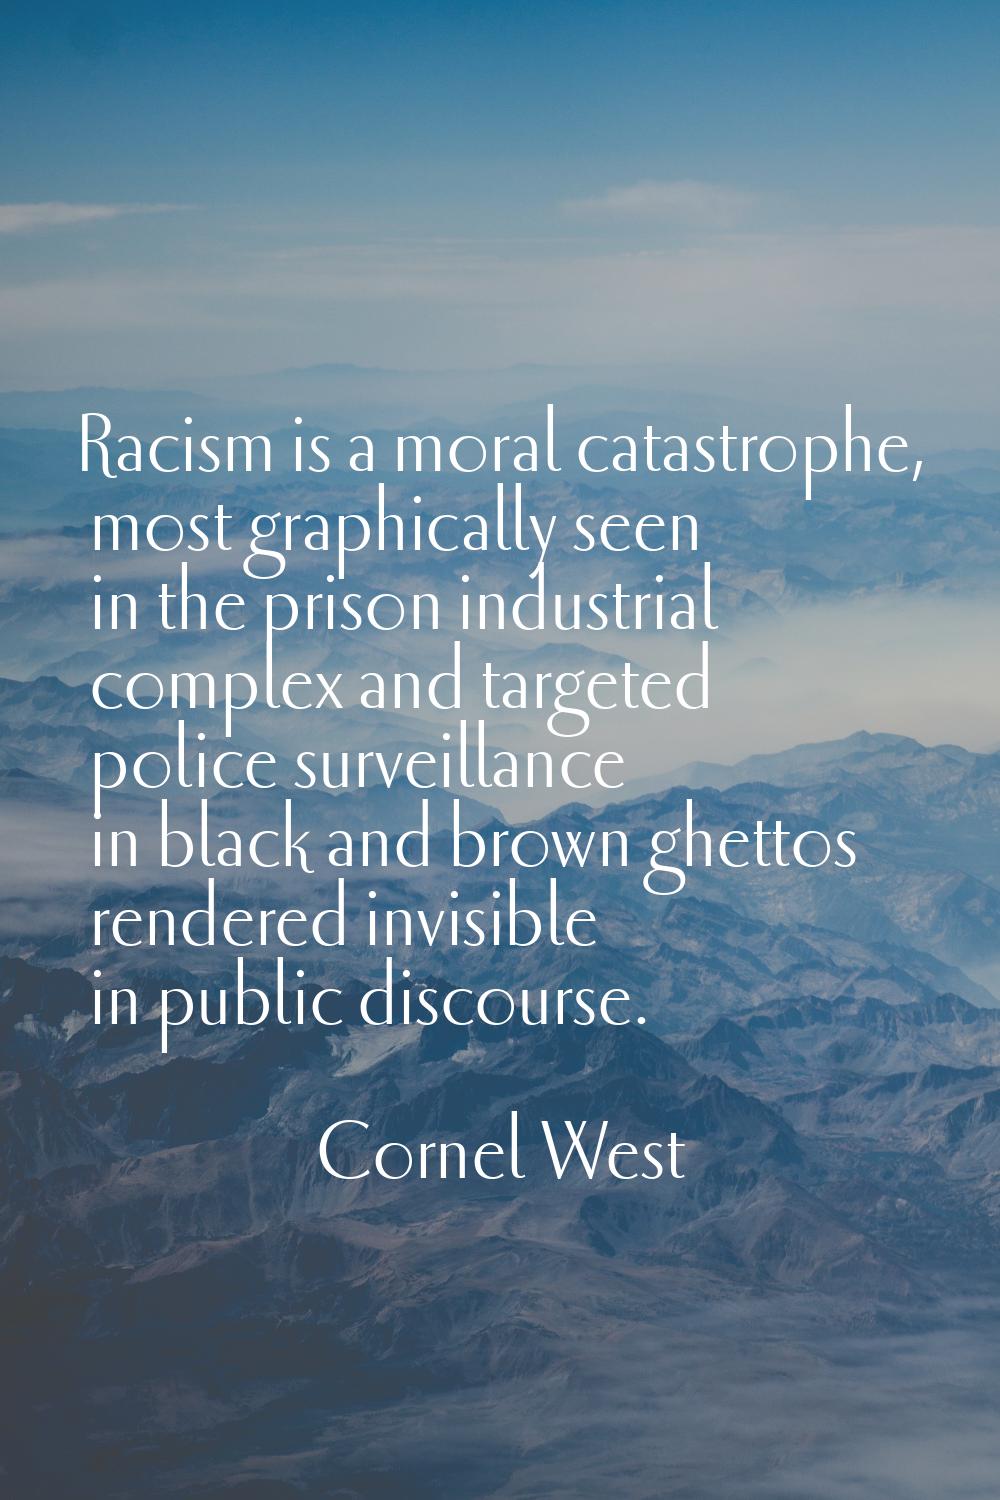 Racism is a moral catastrophe, most graphically seen in the prison industrial complex and targeted 